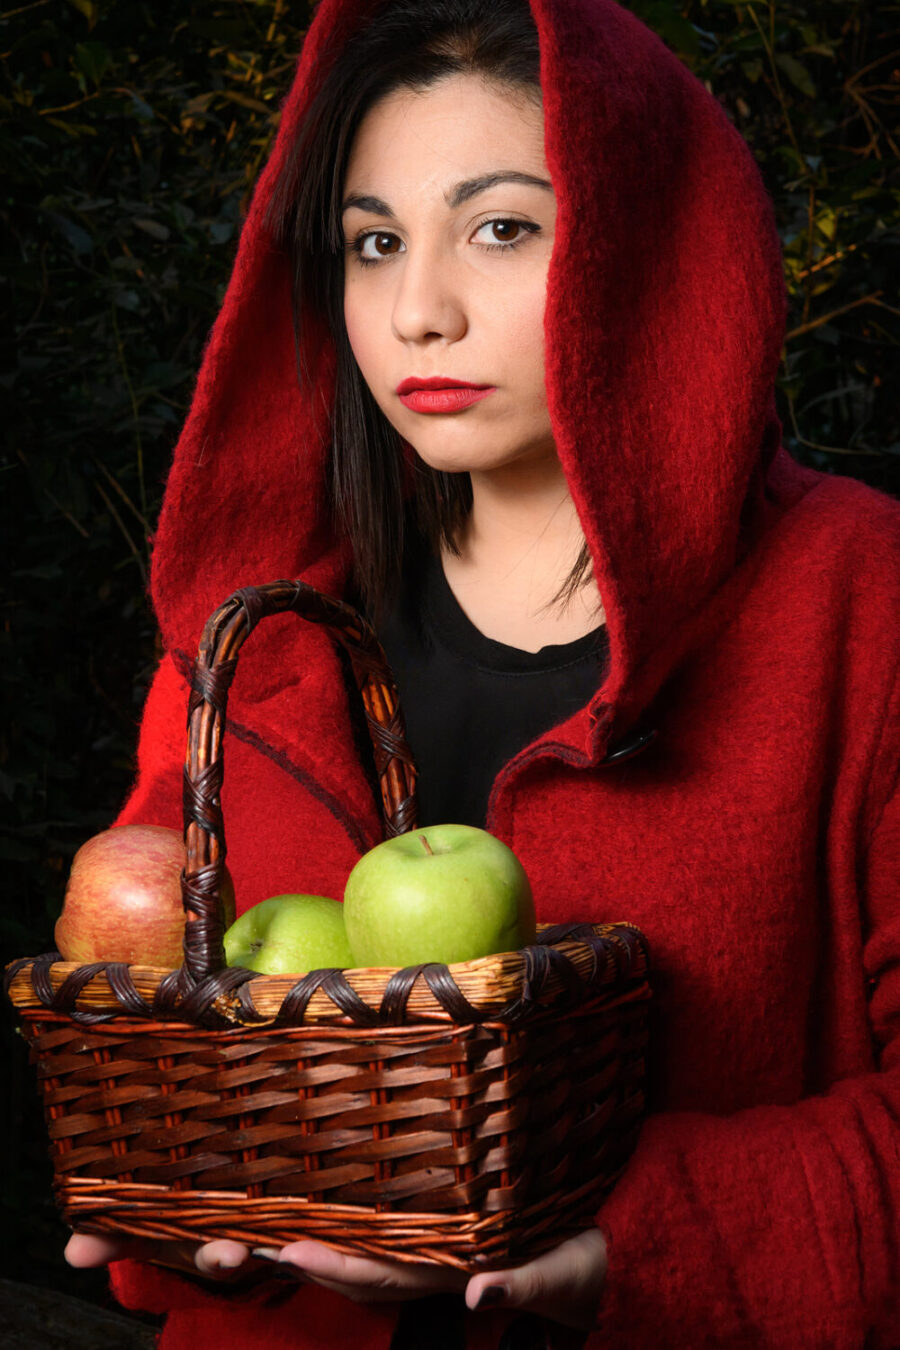 The real Little Red Riding Hood is here